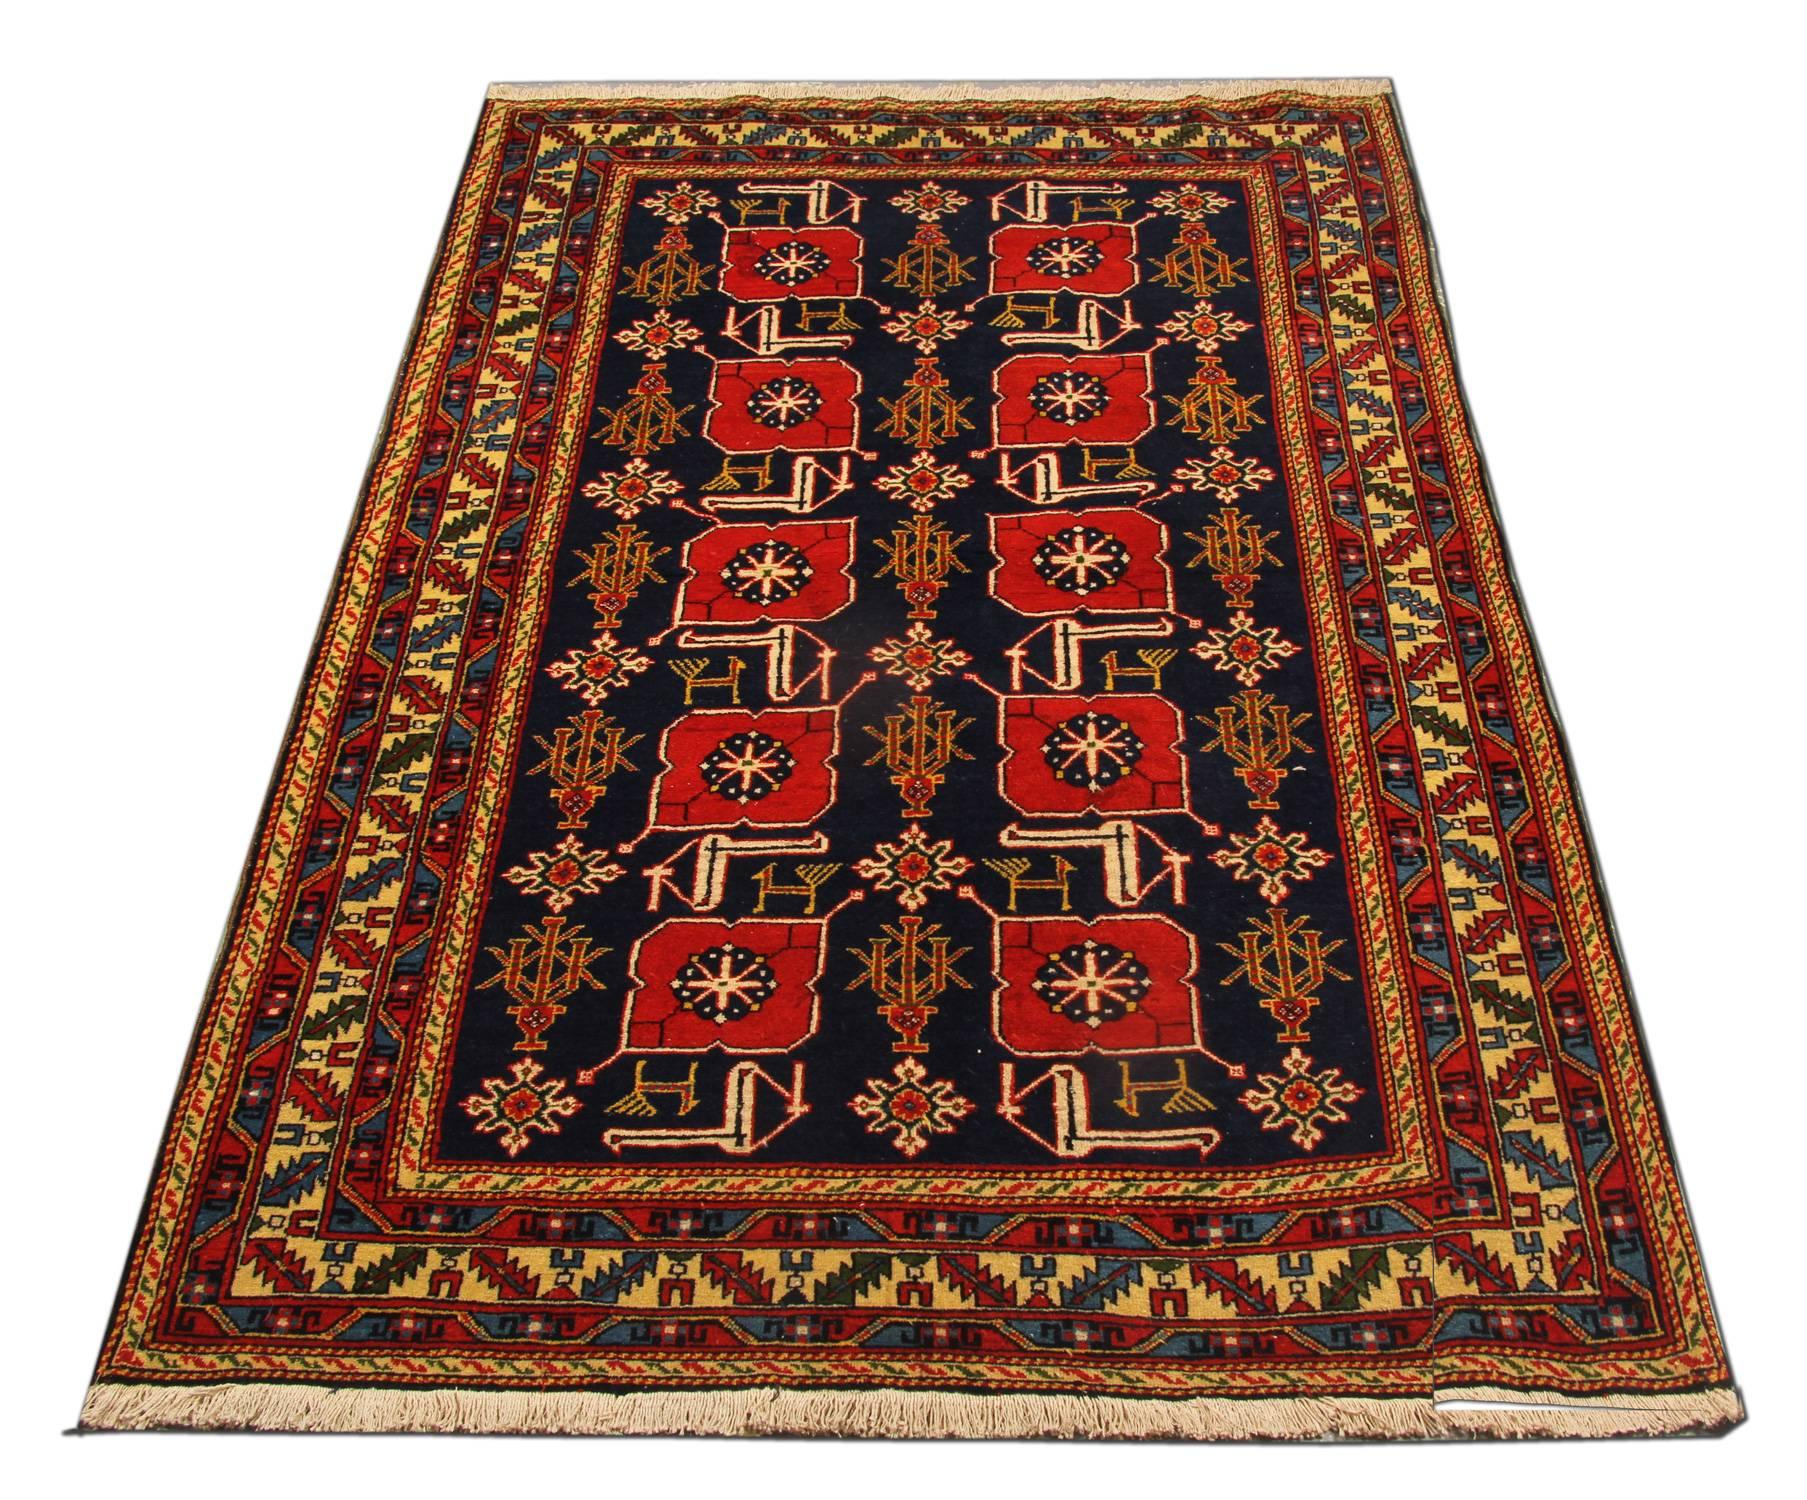 This red rug is a rare antique Caucasian-designed Armenian Karabagh. This tribal rug is a one-of-a-kind treasure in the weaving world. The geometric rug design name is Karaghashli. Luxury rugs as this antique piece of art would complement and give